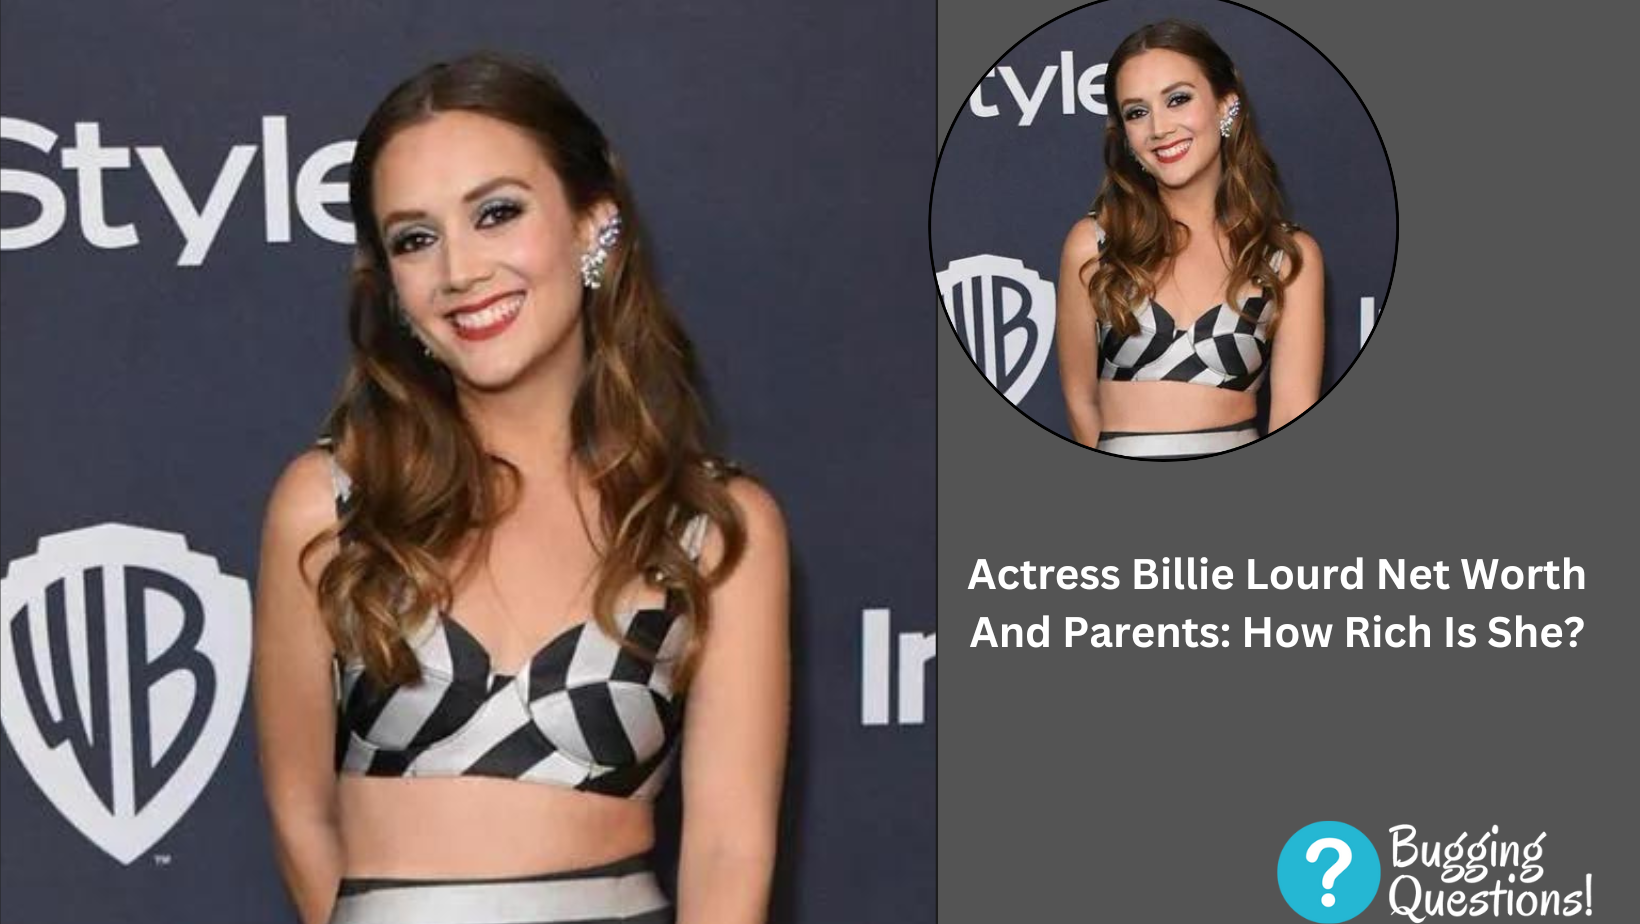 Actress Billie Lourd Net Worth And Parents: How Rich Is She?